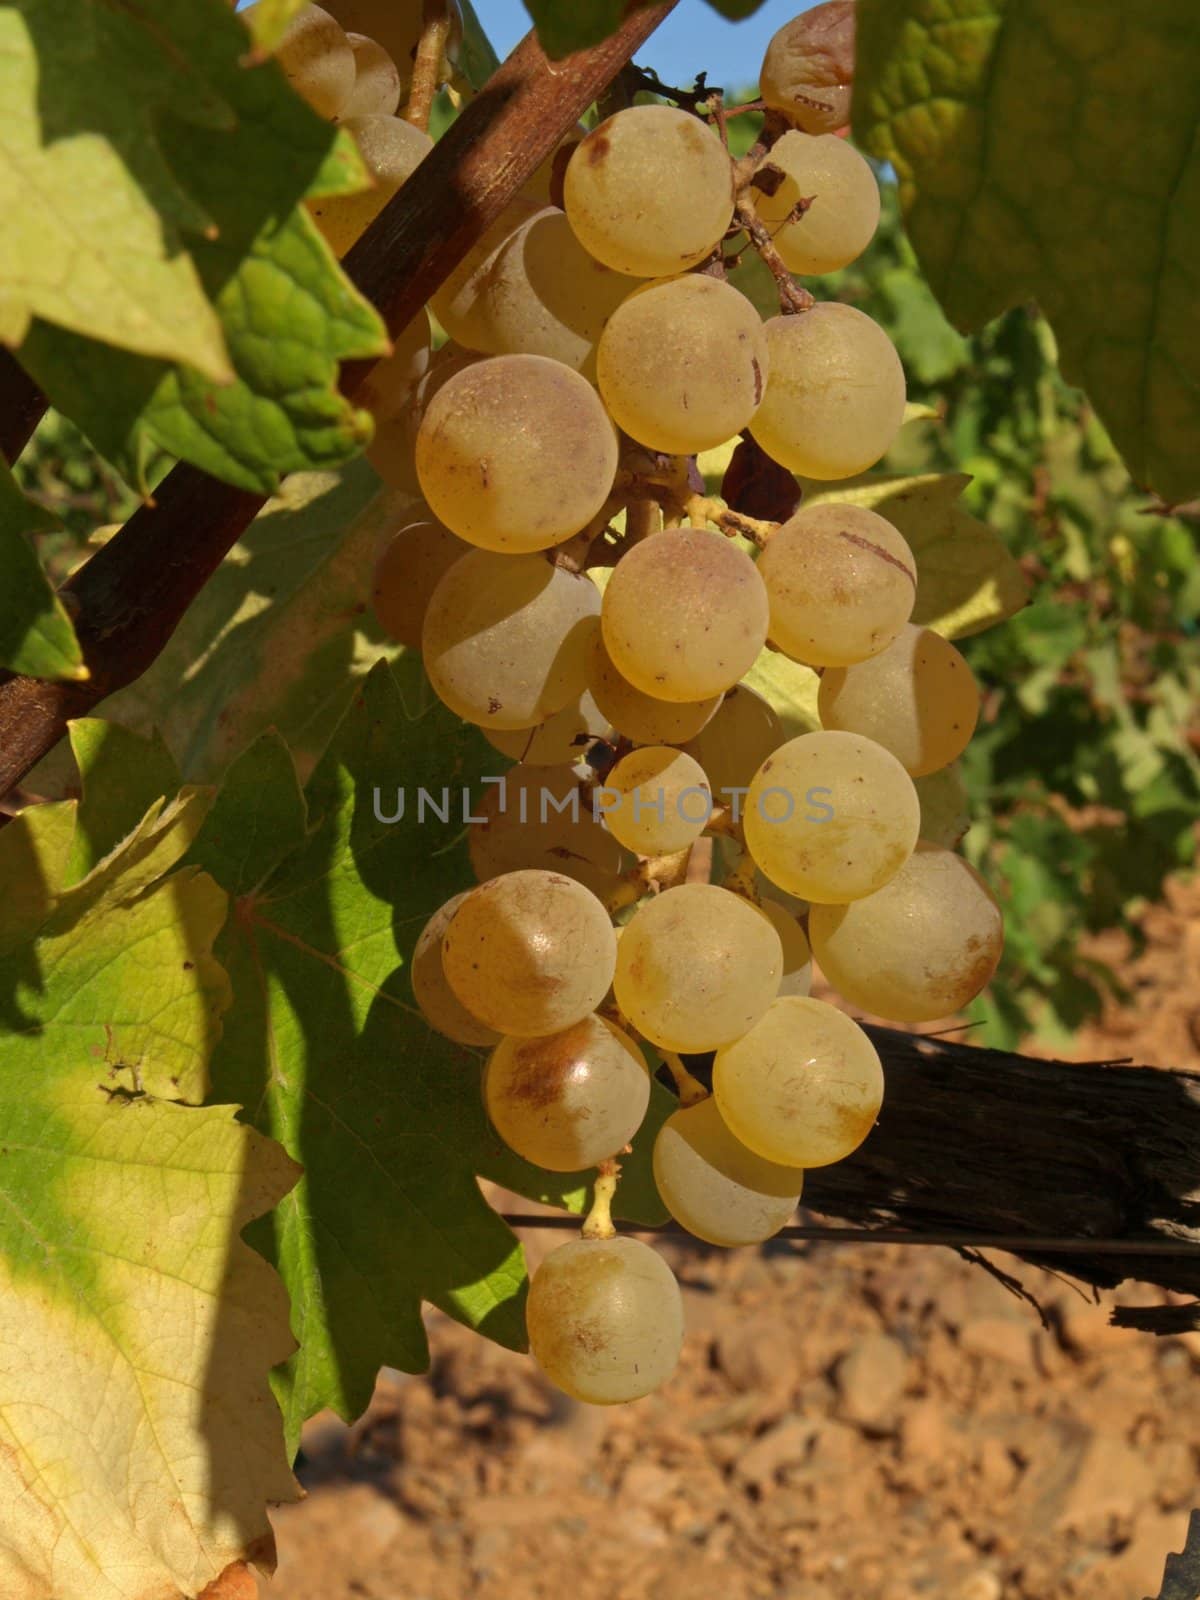 image of some bunches of grape in a provence vineyard